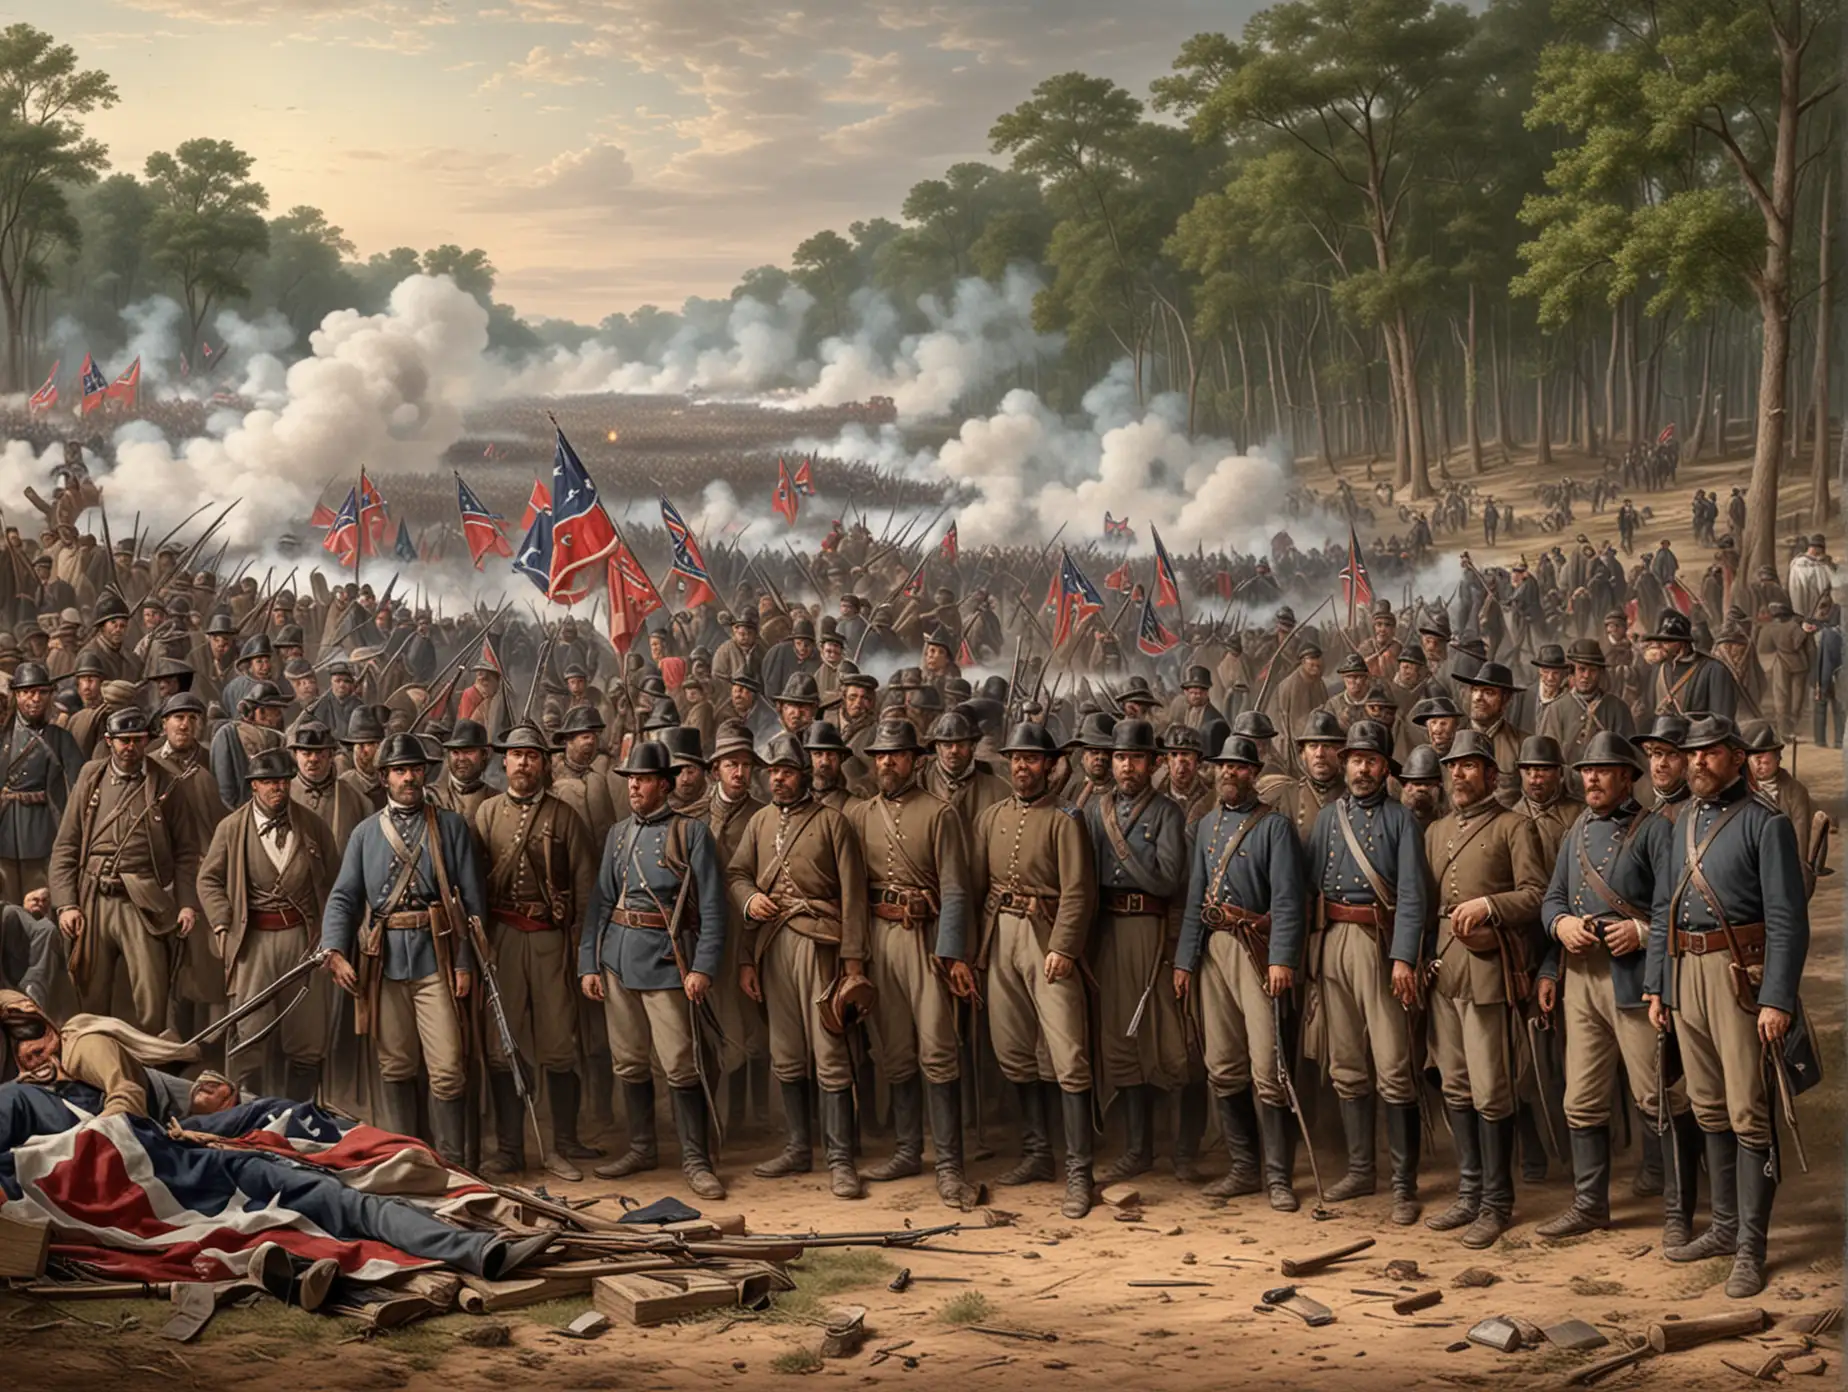 1862 Confederate War Soldiers Marching Through Battlefield